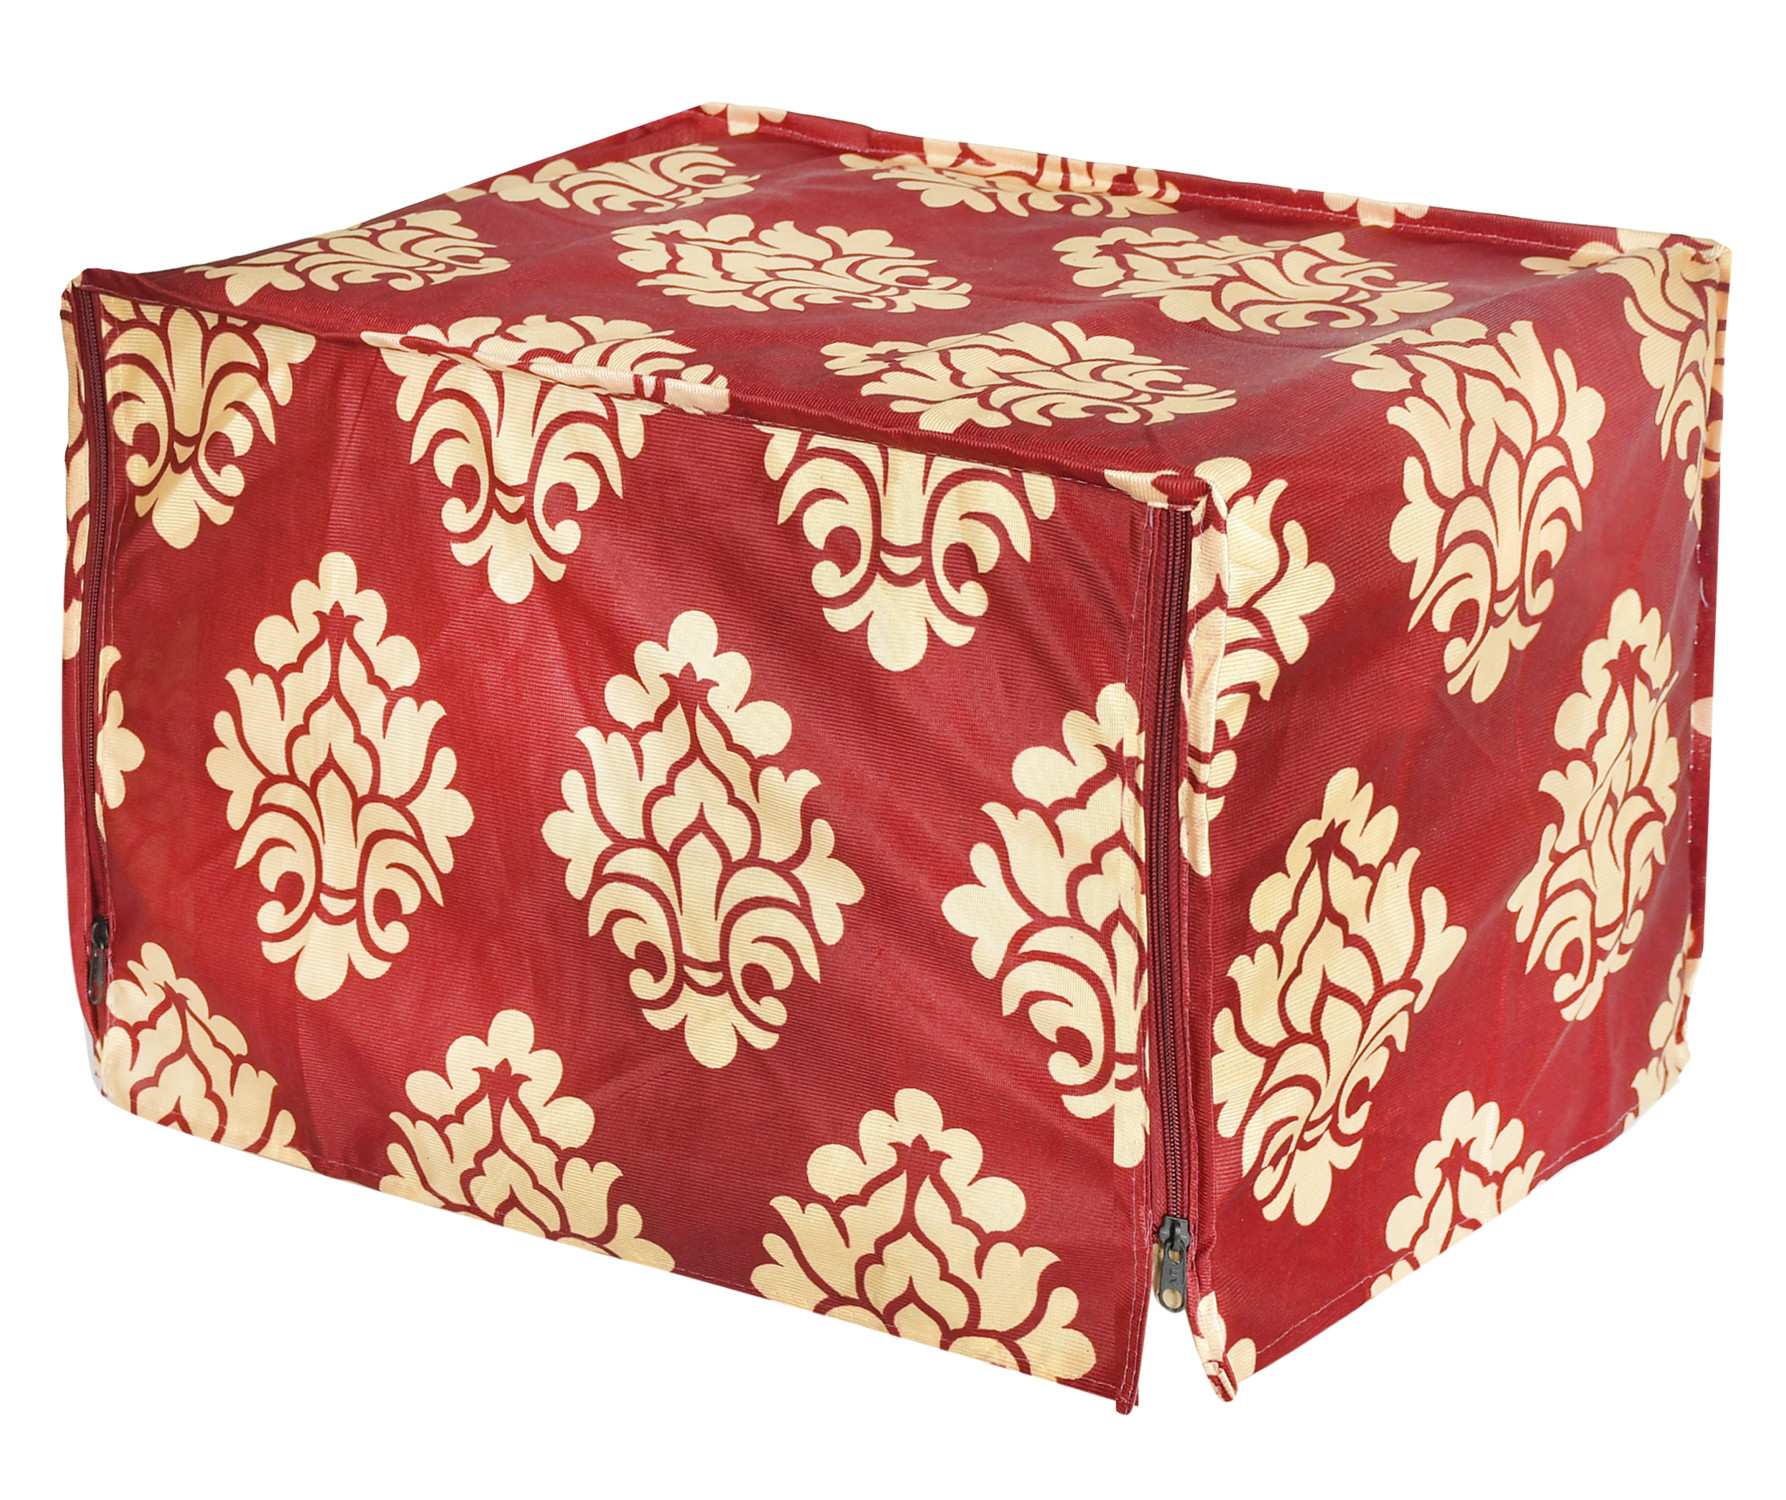 Kuber Industries Polyster Floral Printed Microwave Oven Cover,30 Ltr. (Maroon)-HS43KUBMART25943